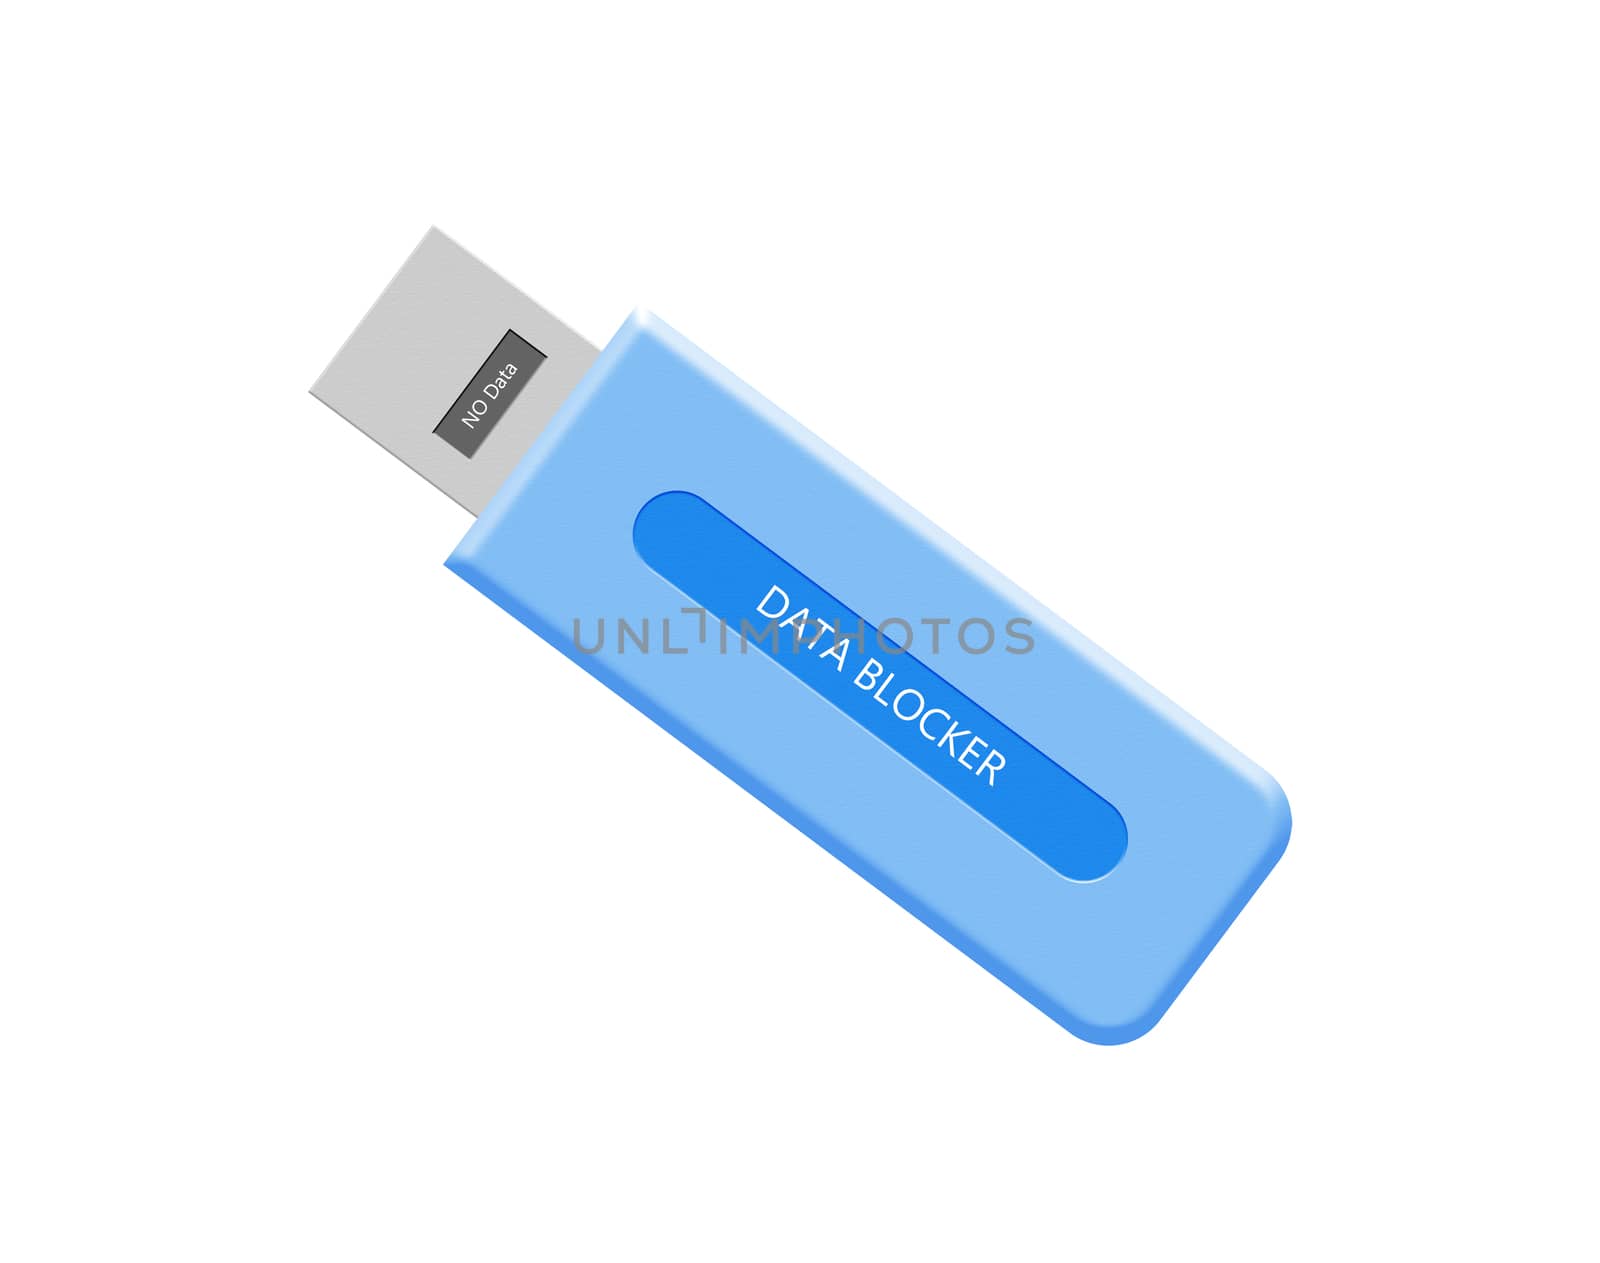 Illustrative example of USB data blocker or Condom used to protect from juice jacking or hacking